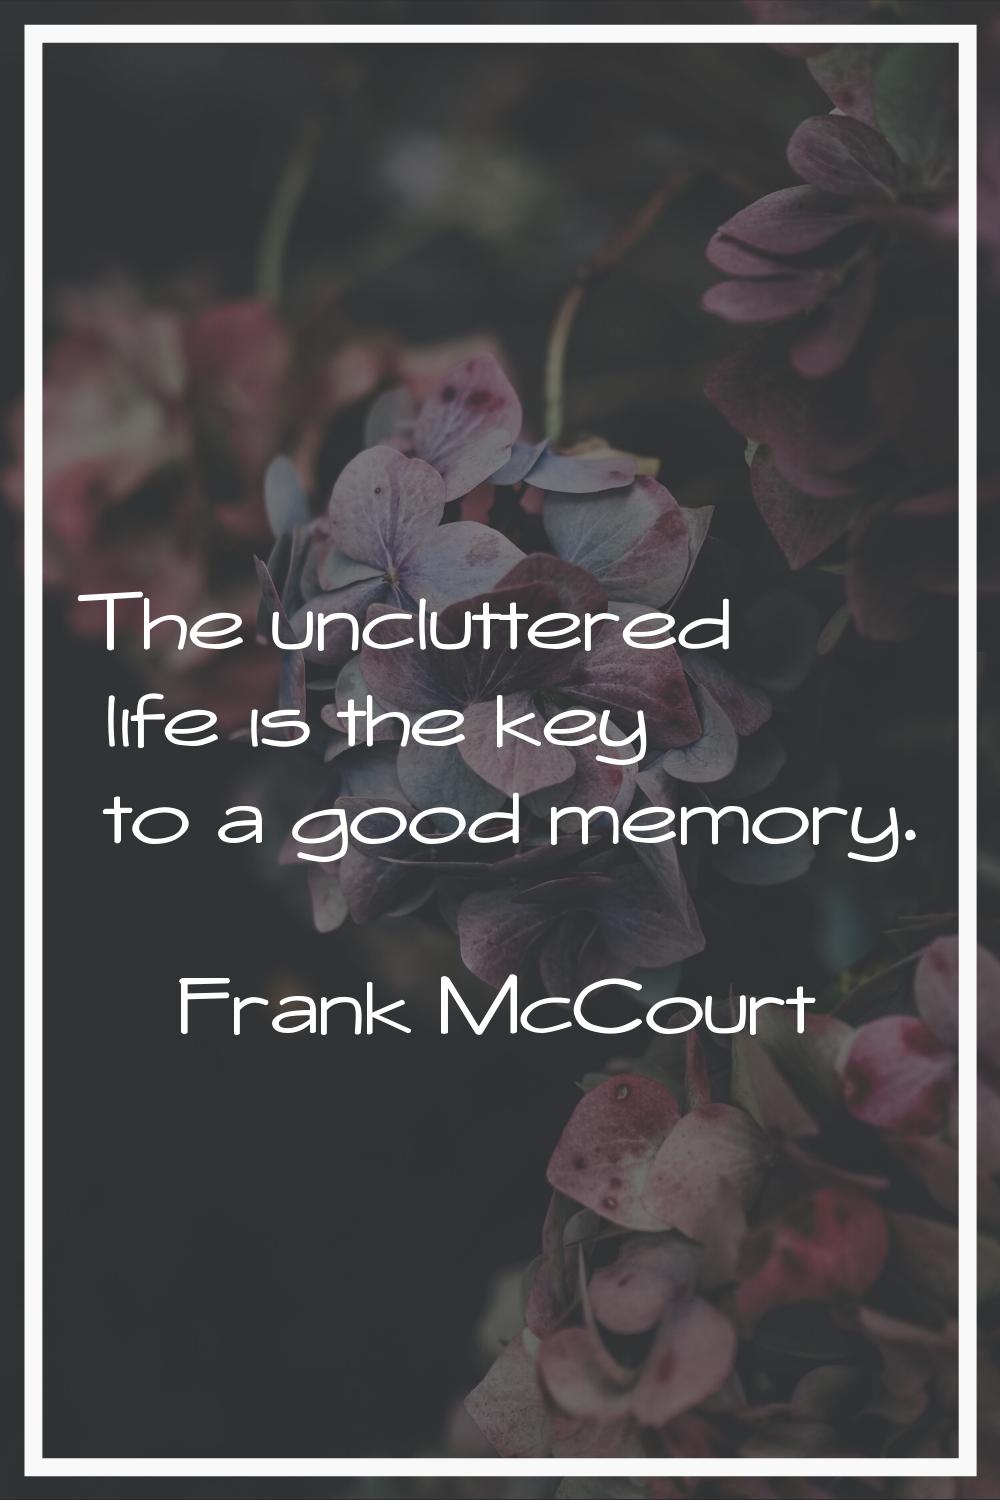 The uncluttered life is the key to a good memory.